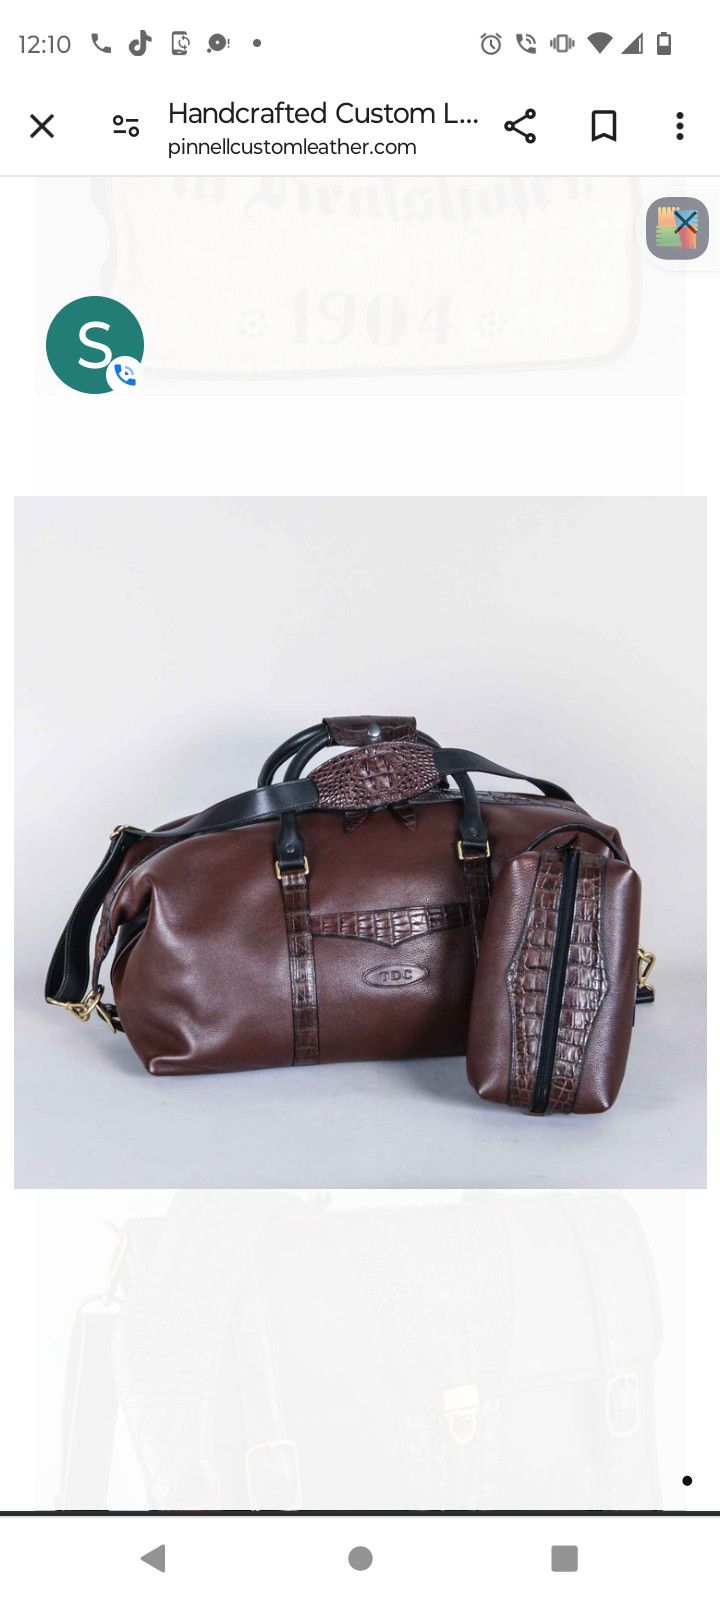 Pinnell Exclusive Leather/Gator Duffle Bag